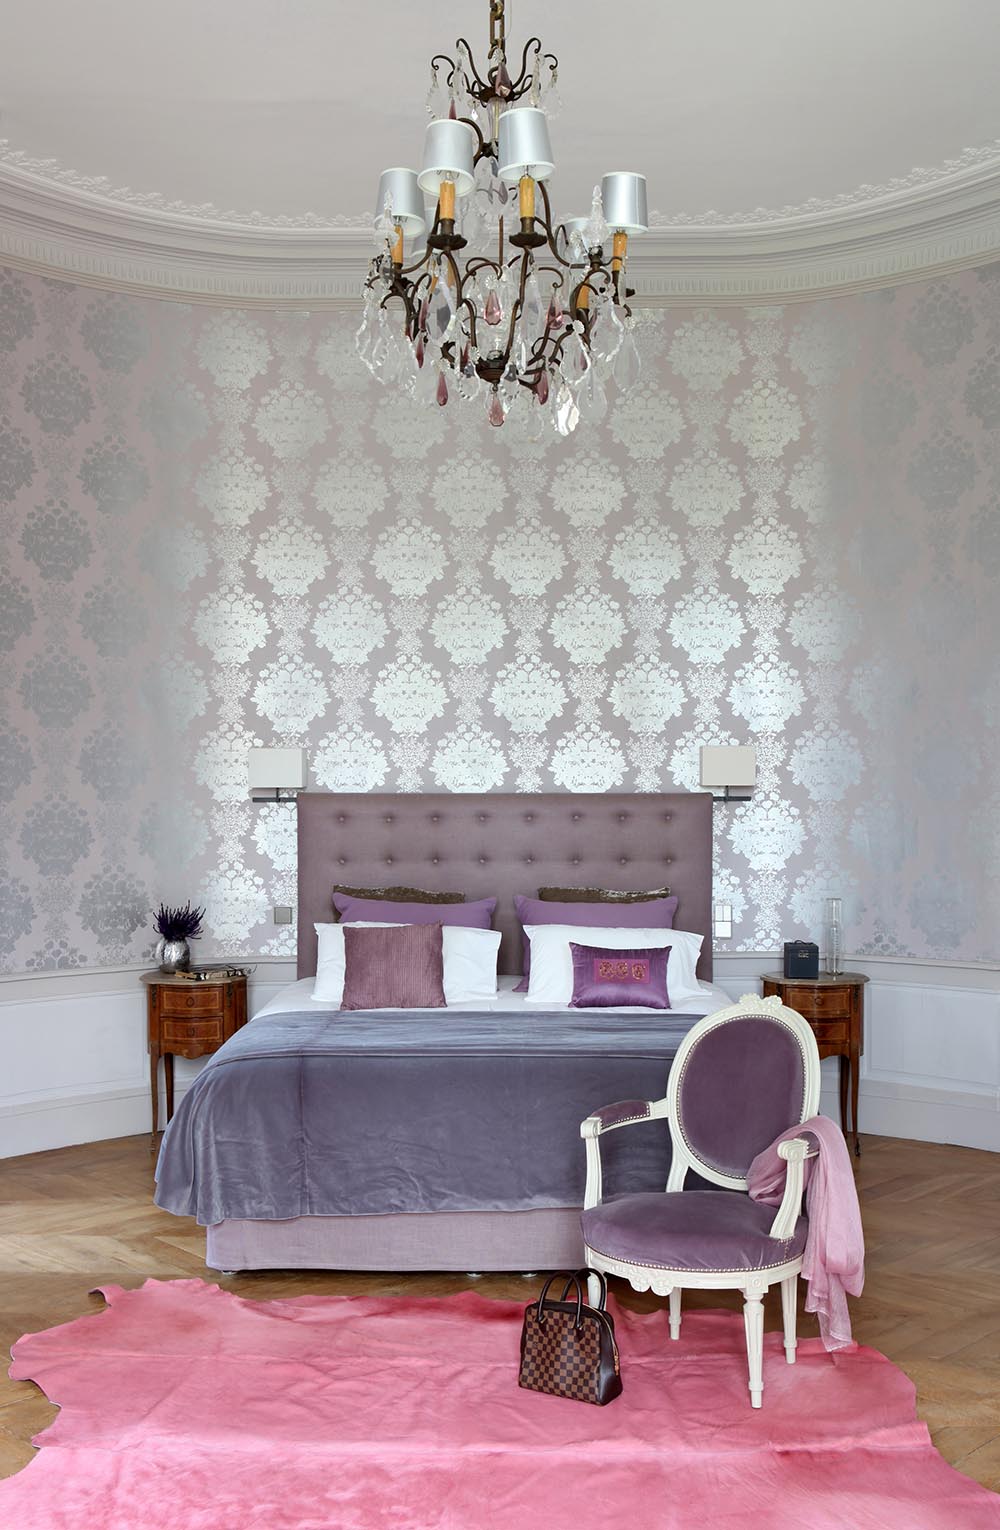 Metallic Wallpaper And Muted Shades Of Lavender Make This Bedroom